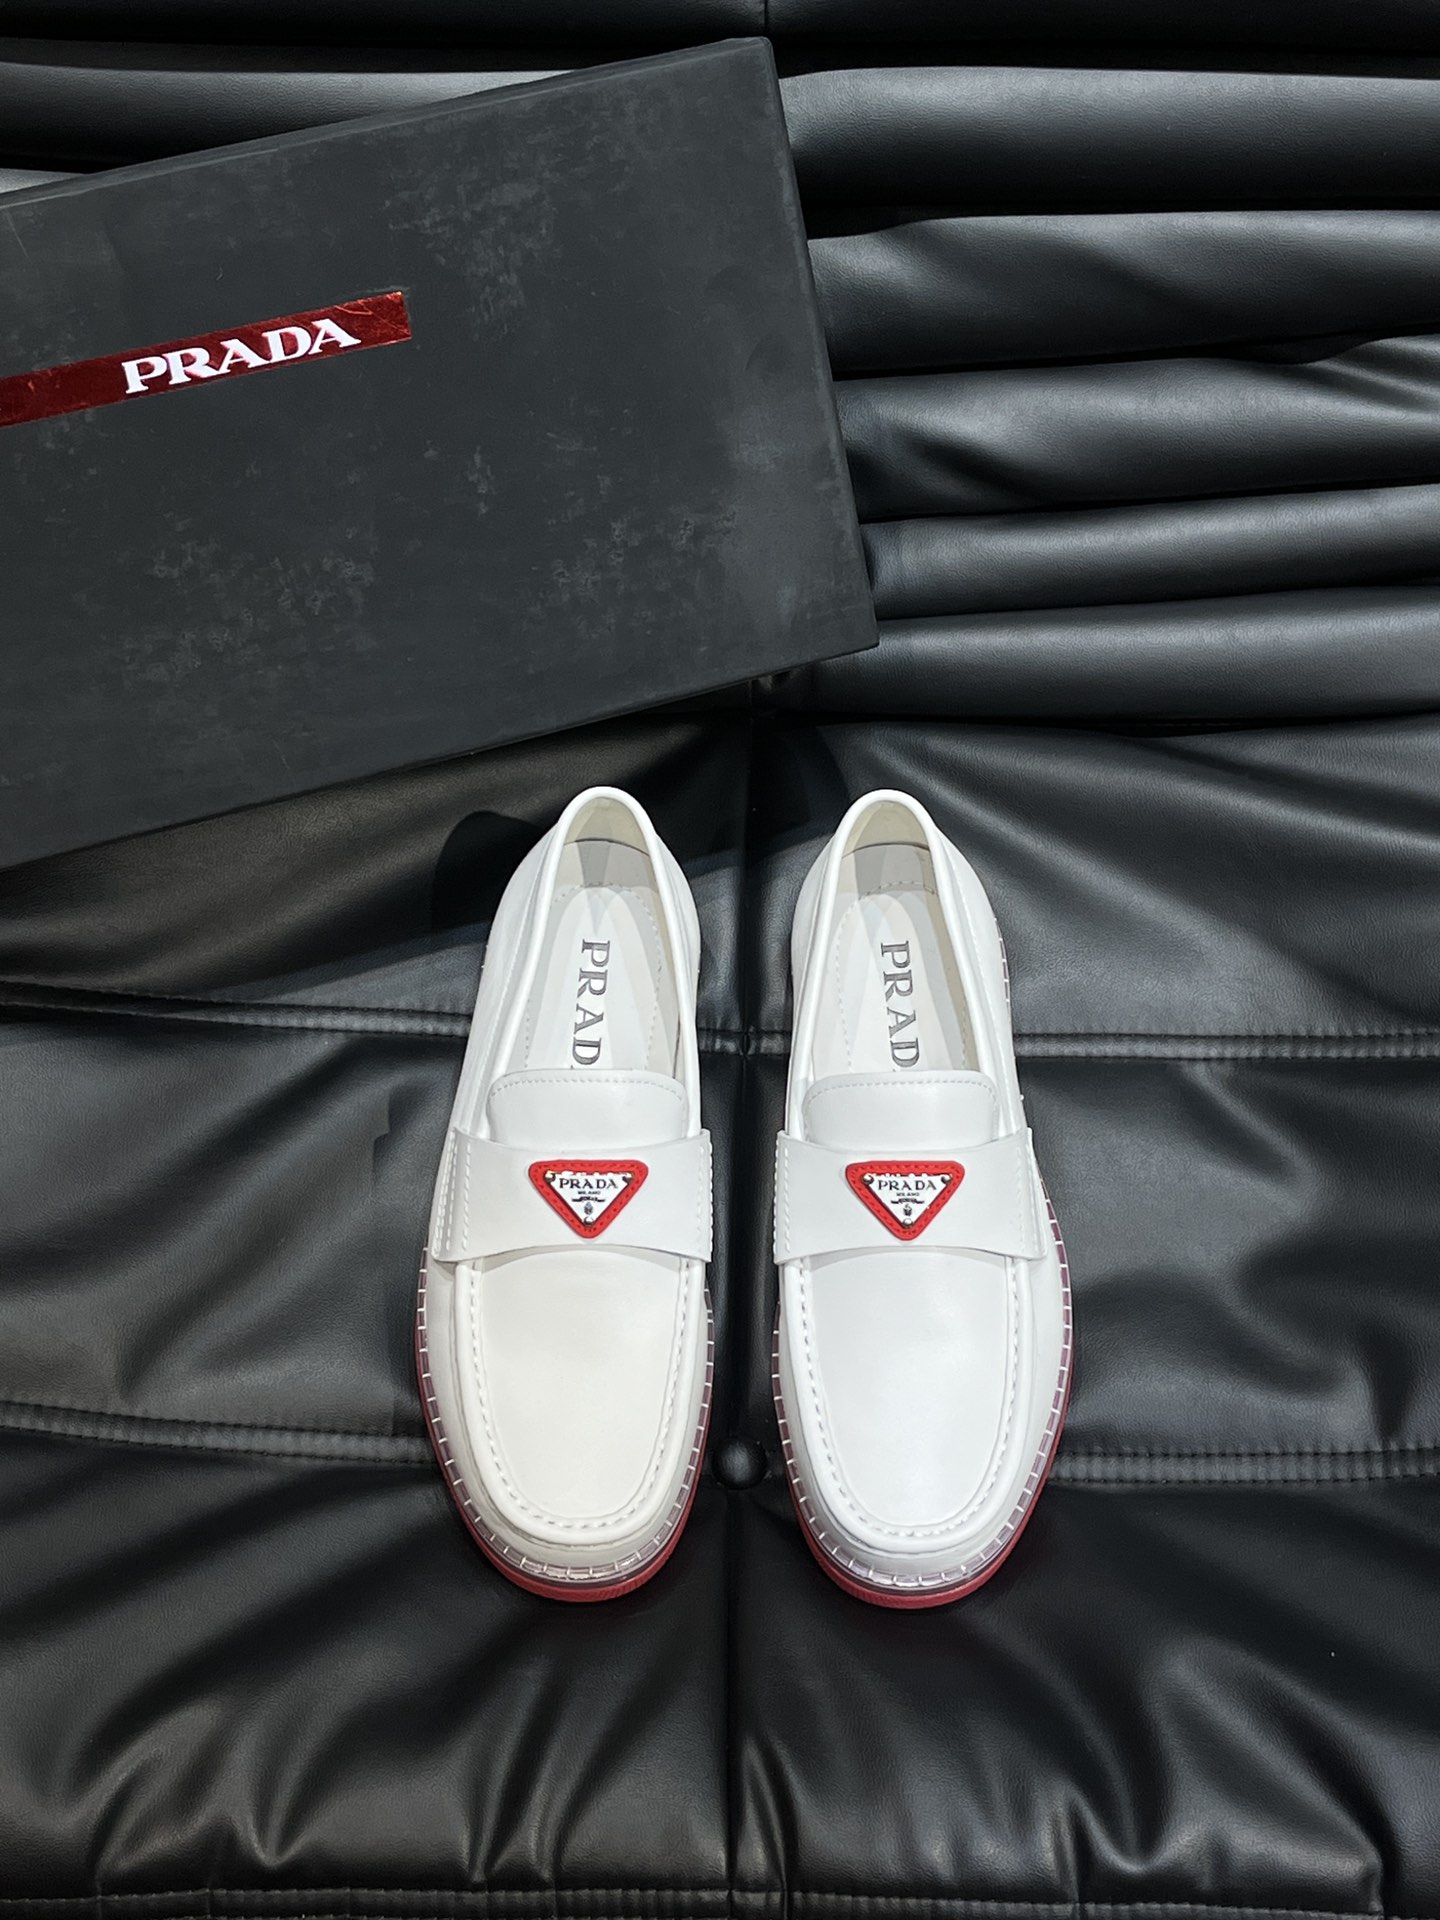 Prada Shoes Loafers Calfskin Cowhide Rubber